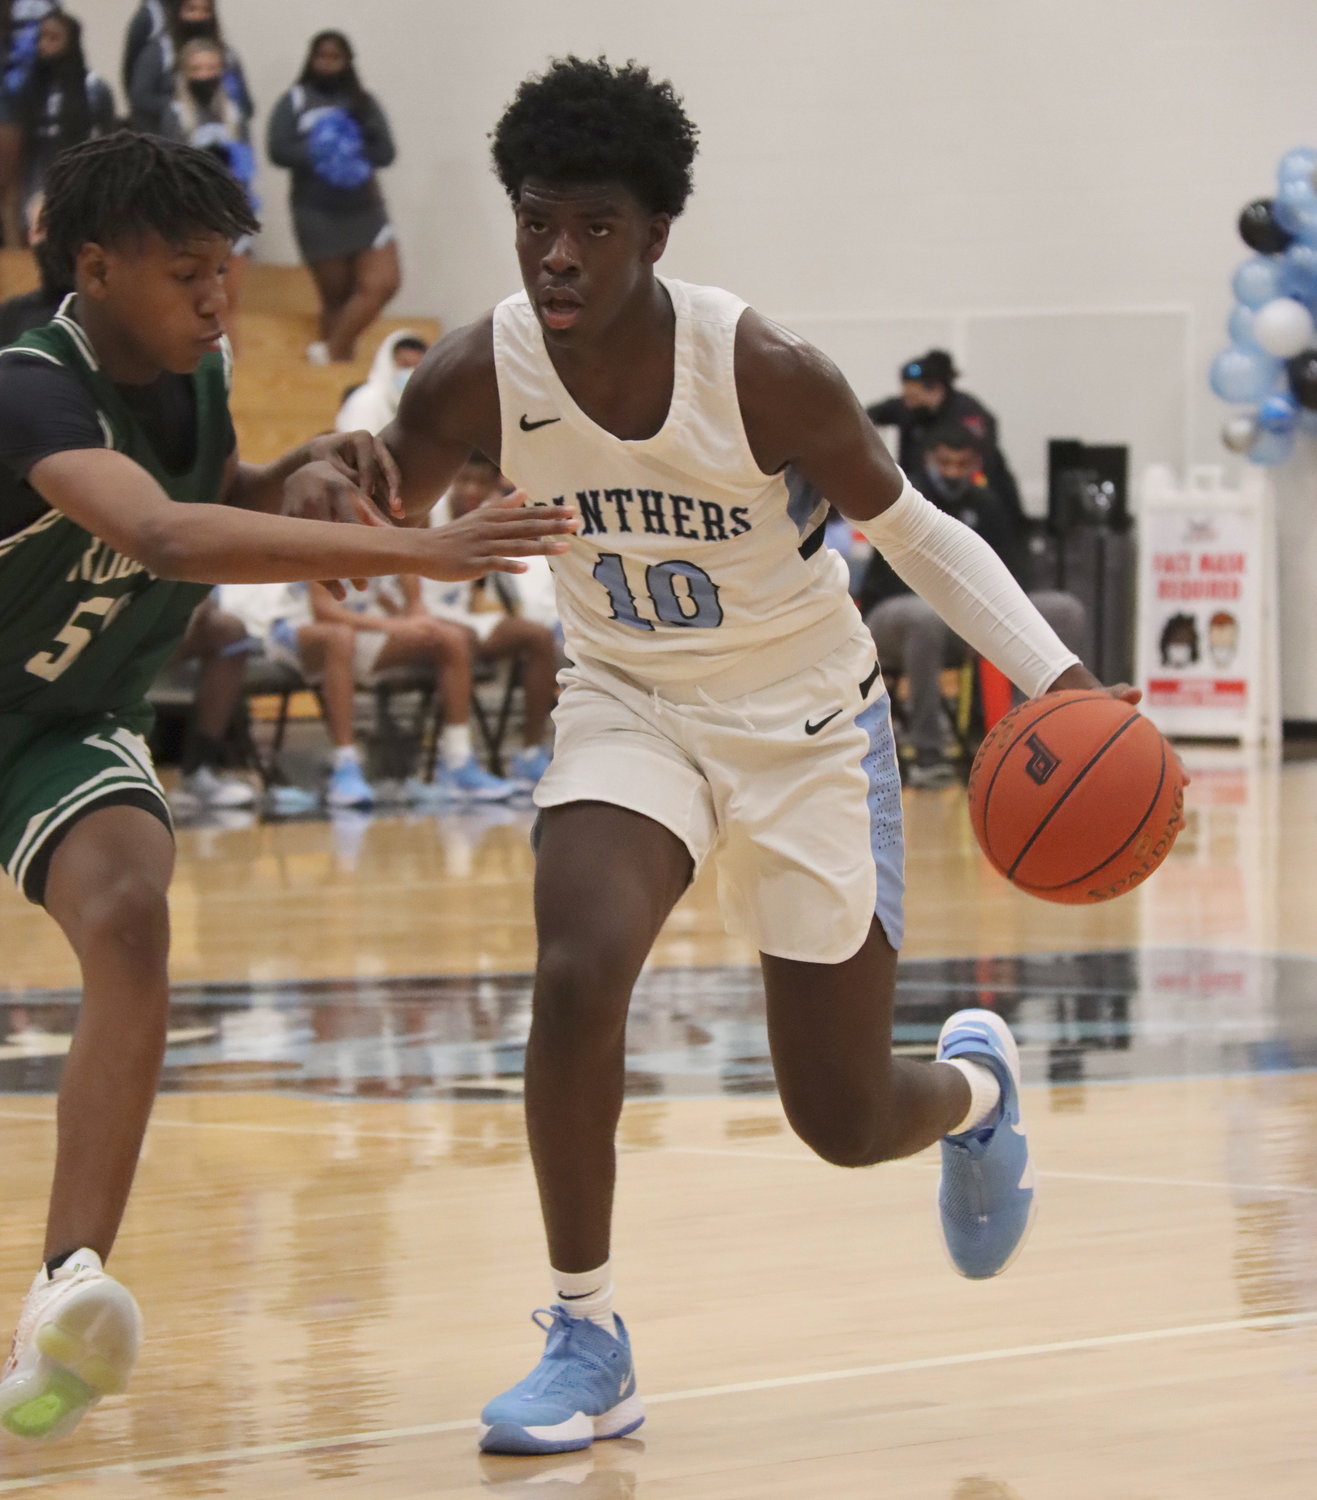 Paetow junior forward Idy Igbaroola (10) handles the ball against defensive pressure during the Panthers’ game against Bryan Rudder on Saturday, Feb. 6, at Paetow High.